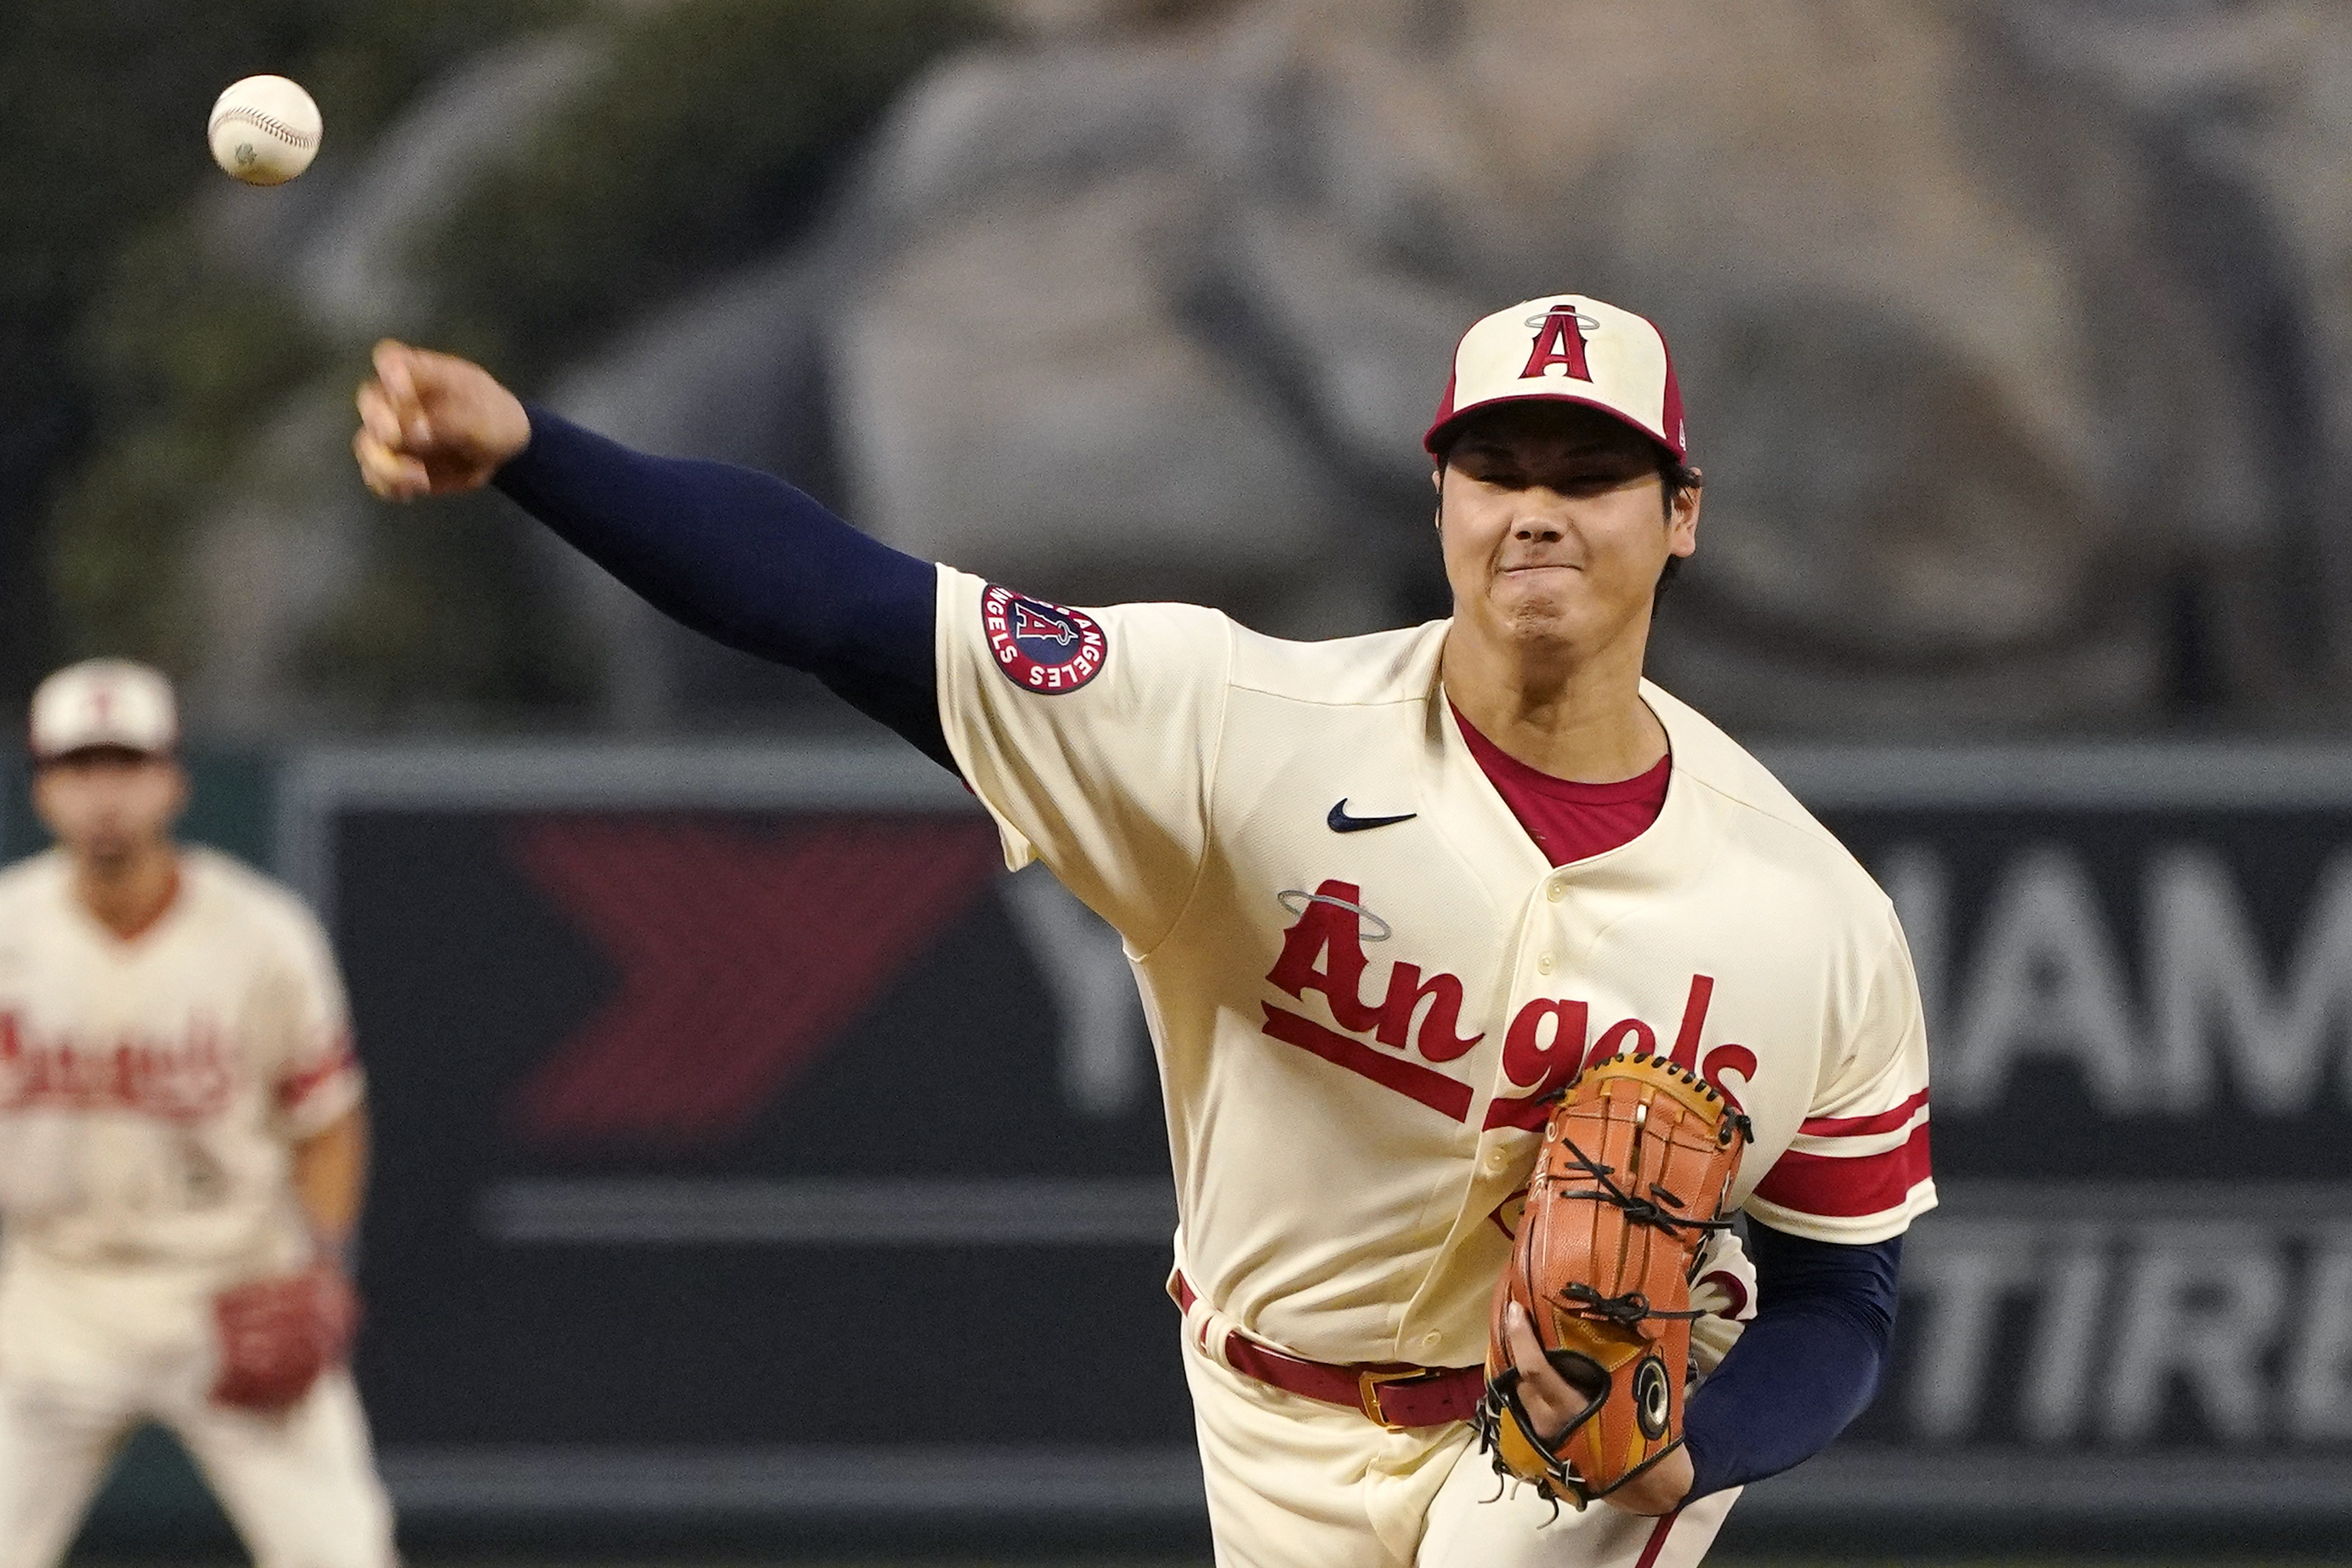 Two-way phenom Shohei Ohtani could be one of Mets top deals along